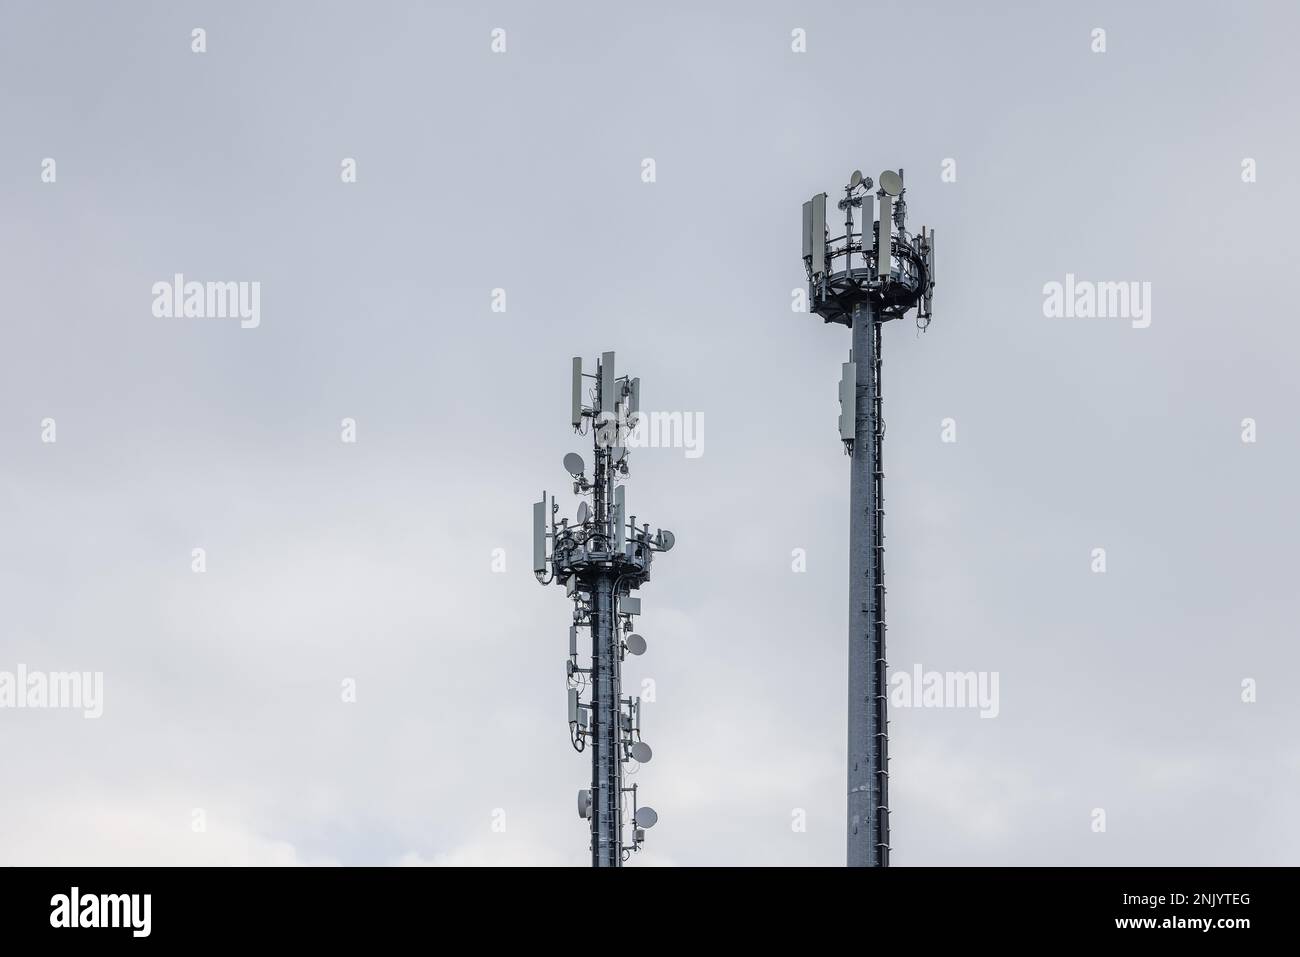 Two cell towers with different antennas and signal boosters against a cloudy sky Stock Photo